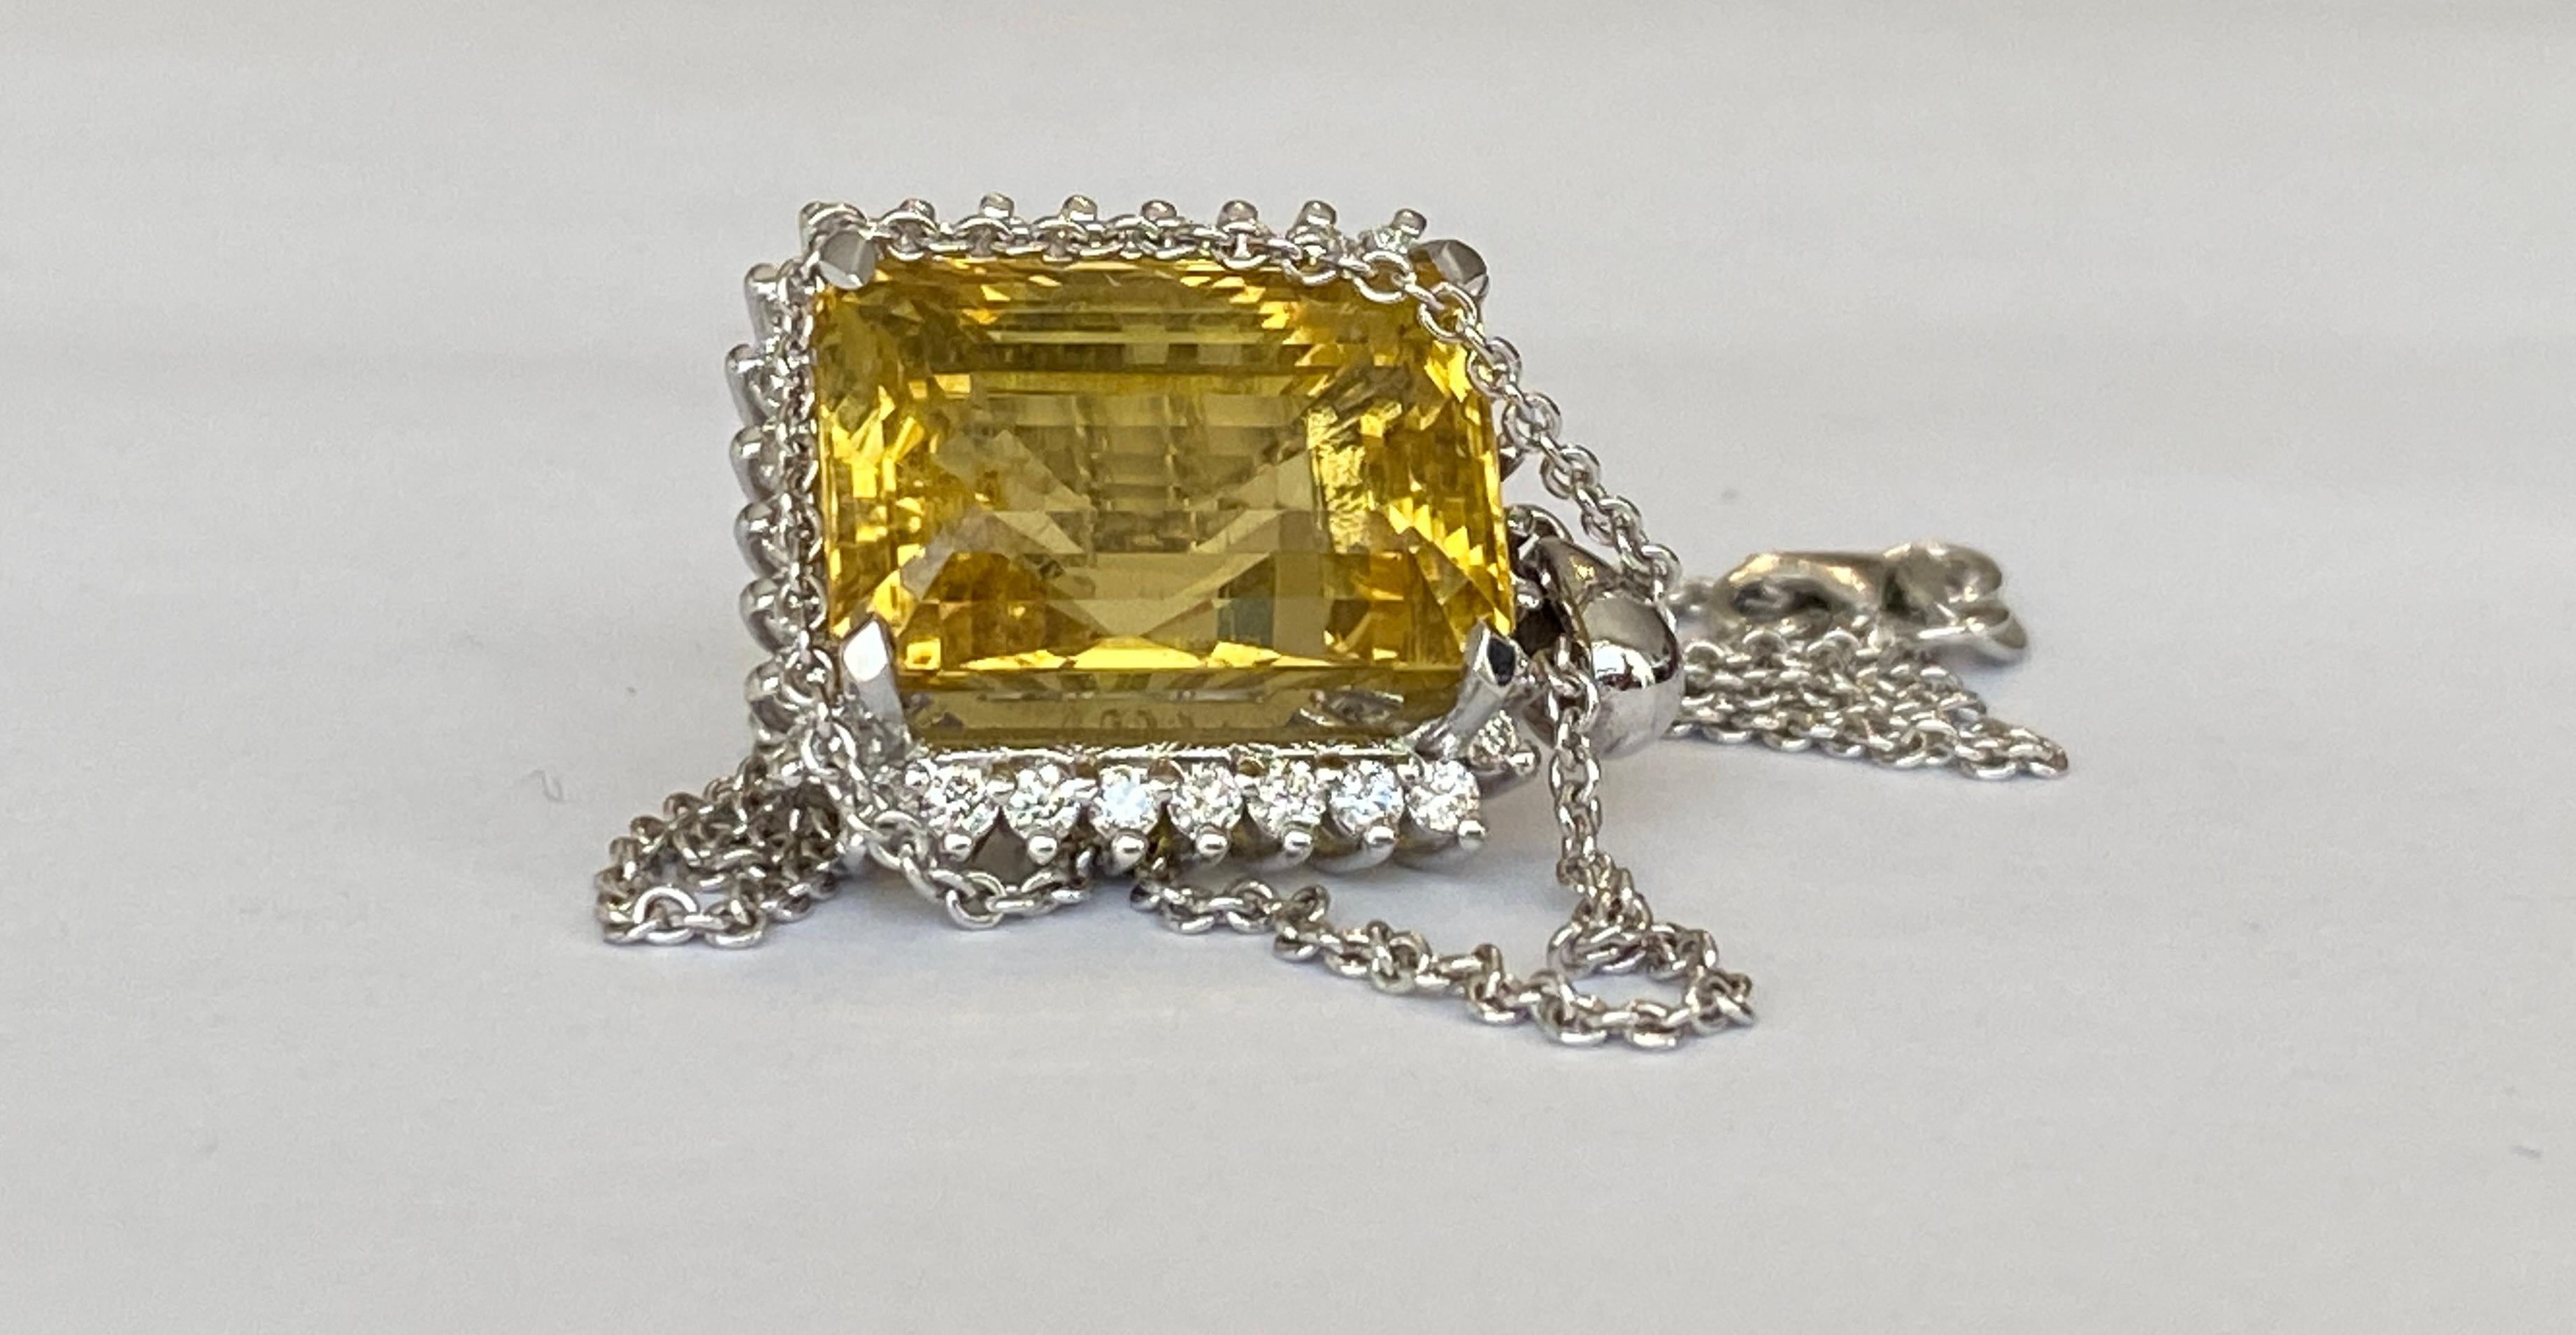 18 Karat White Gold Necklace with a Diamond Pendant Decorated with Citrine 2